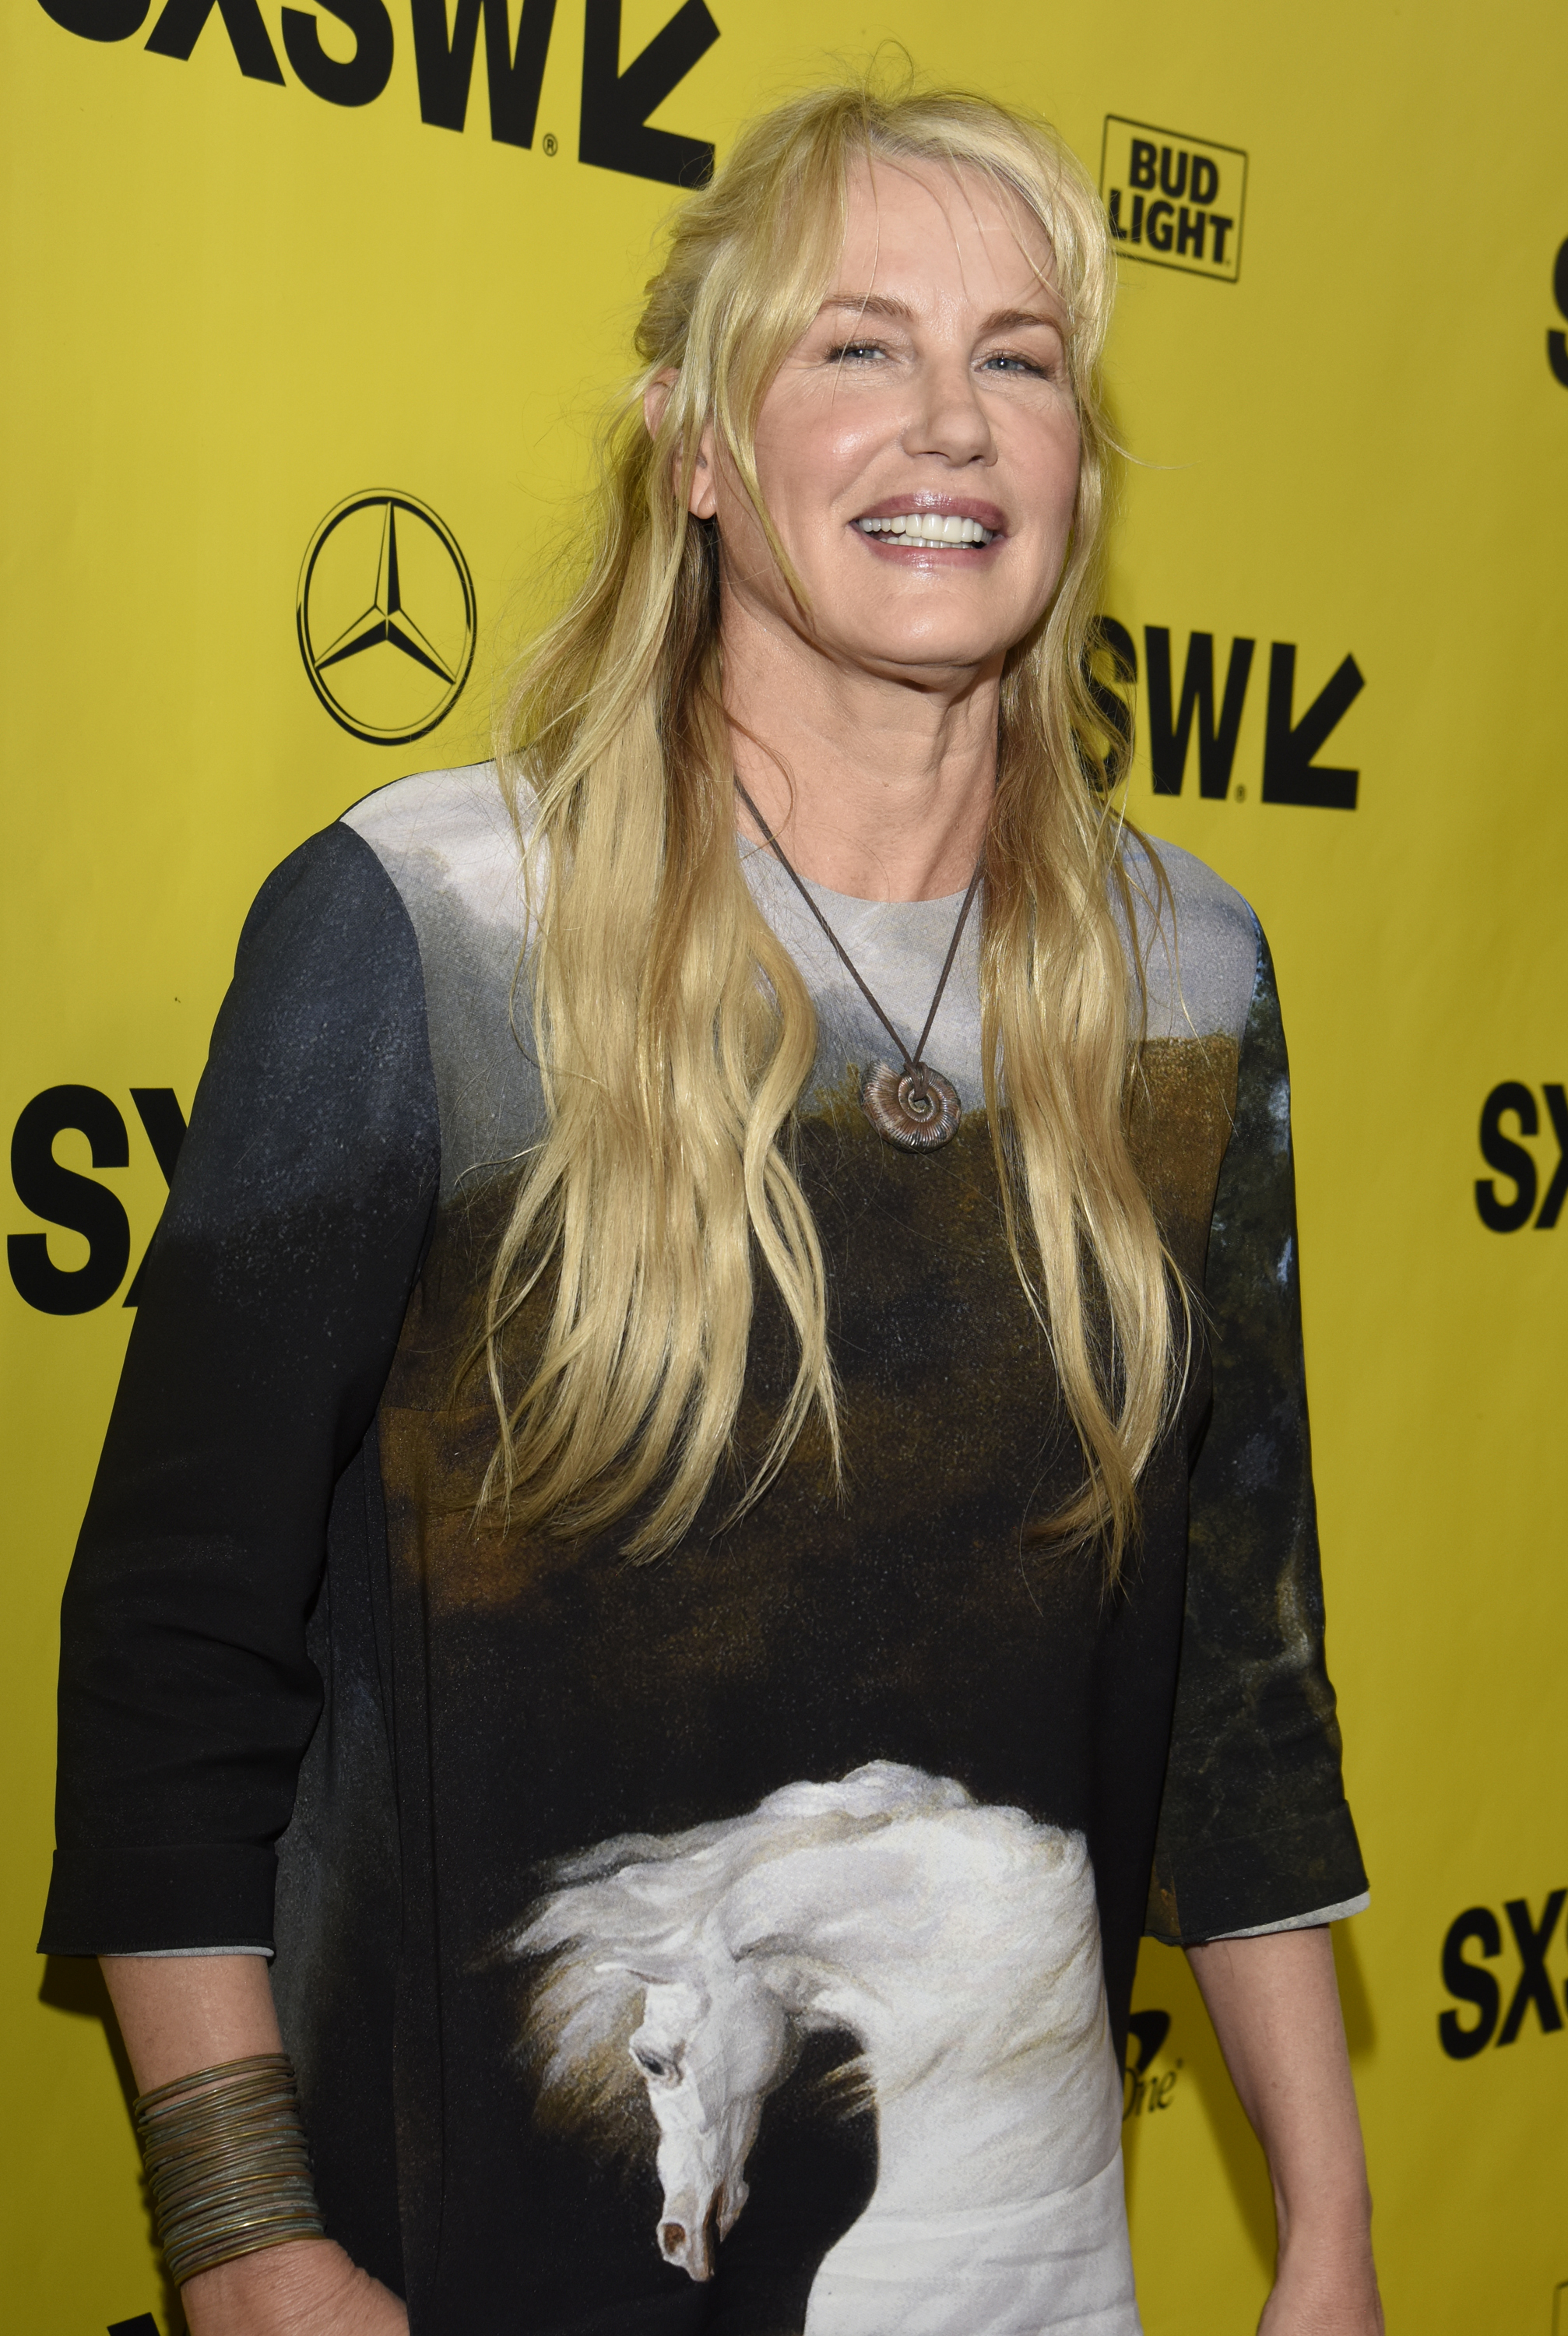 Daryl Hannah at the premiere of "Paradox" during SXSW 2018 on March 15, 2018, in Austin, Texas. | Source: Getty Images